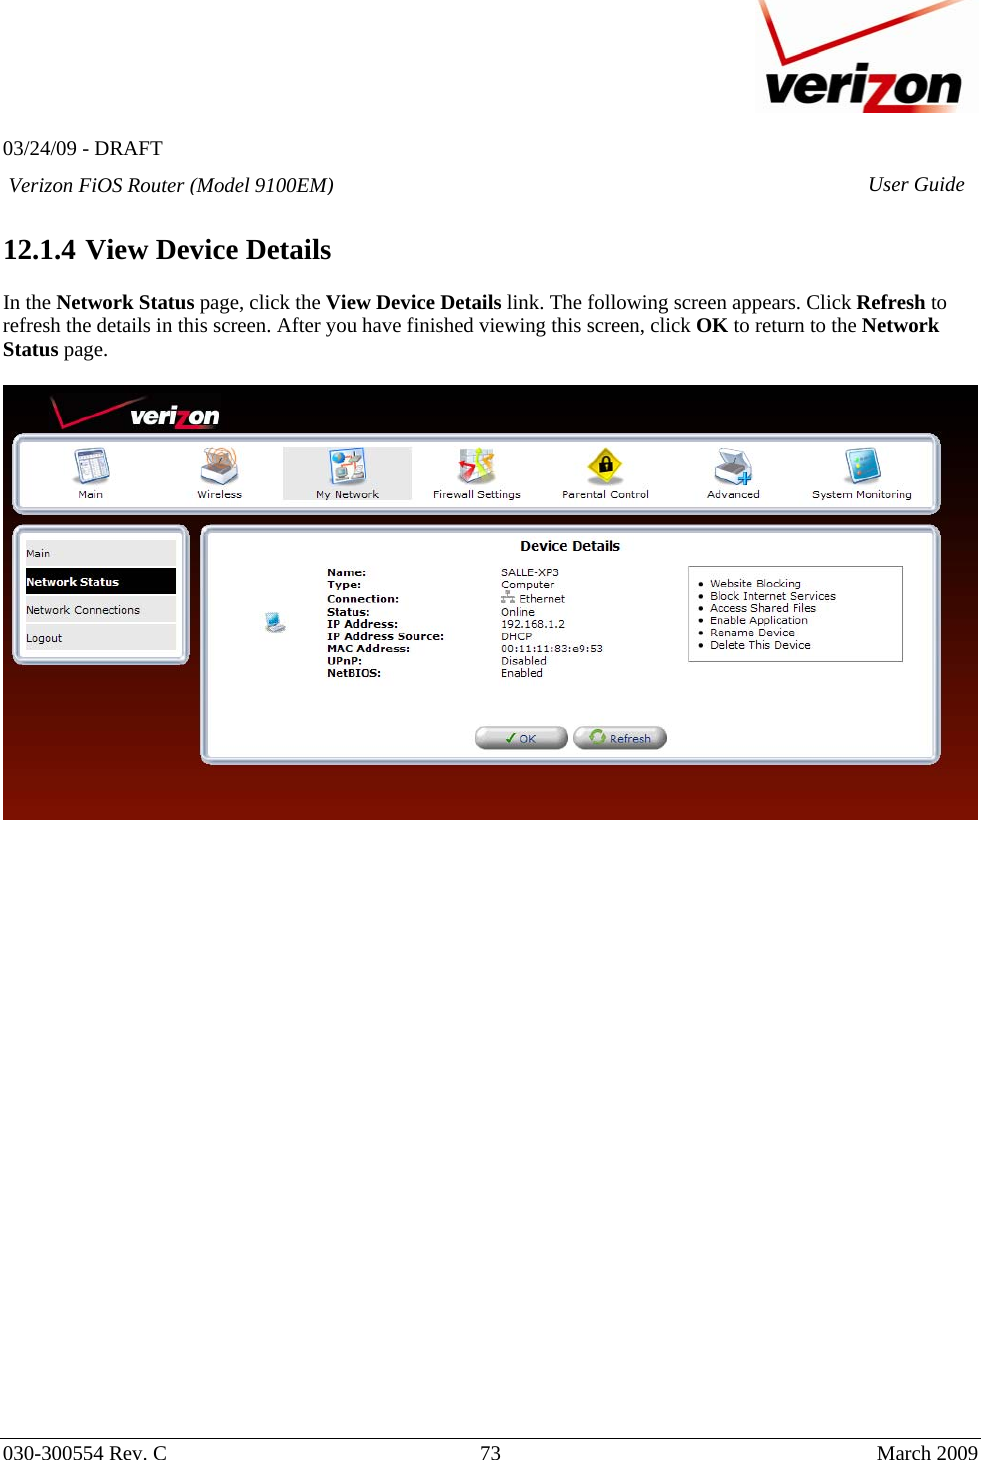   03/24/09 - DRAFT   030-300554 Rev. C  73      March 2009  Verizon FiOS Router (Model 9100EM) User Guide 12.1.4  View Device Details  In the Network Status page, click the View Device Details link. The following screen appears. Click Refresh to refresh the details in this screen. After you have finished viewing this screen, click OK to return to the Network Status page.                            